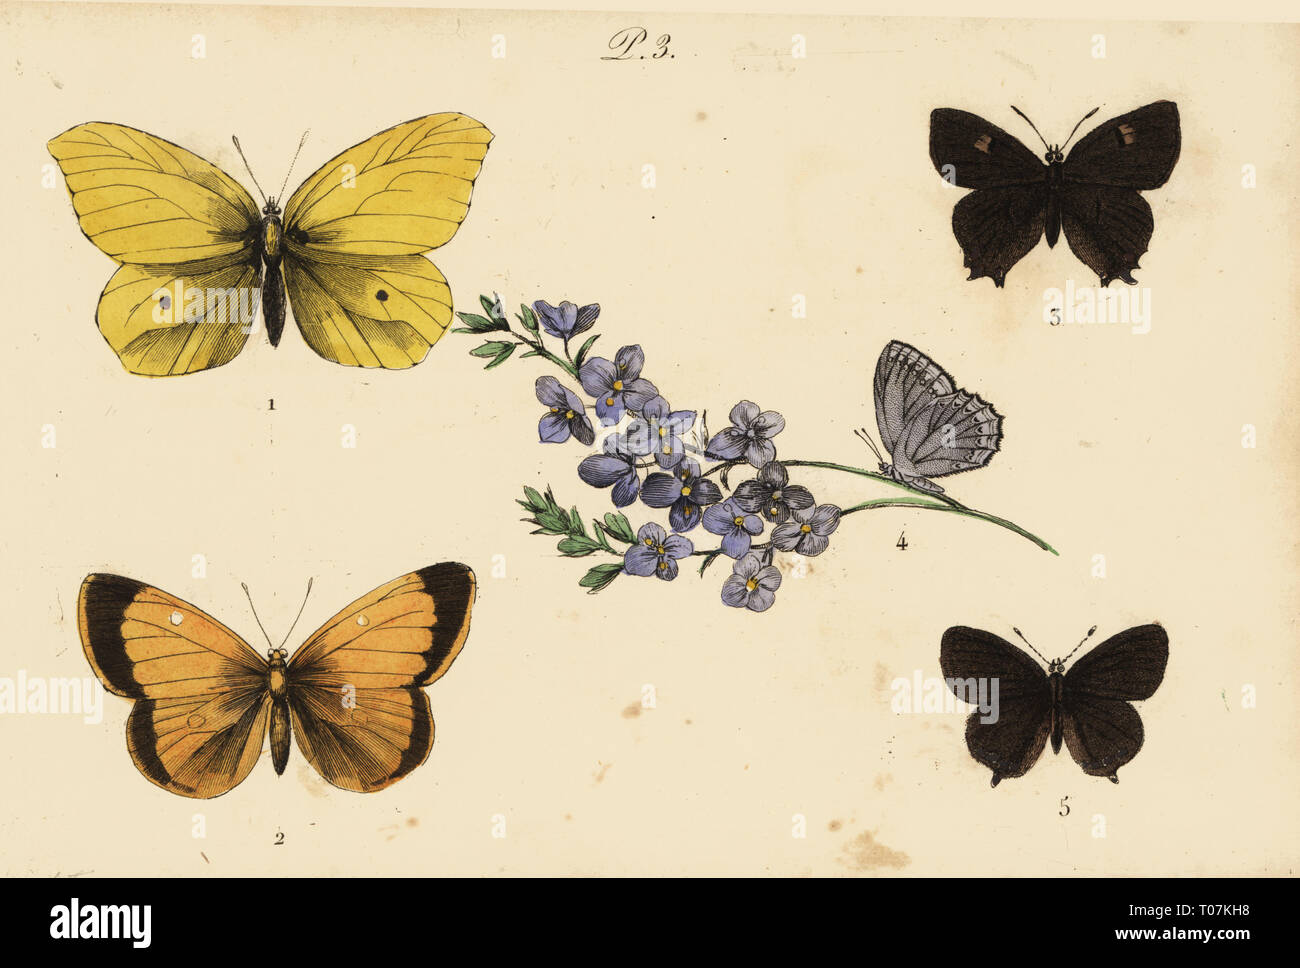 Common brimstone, Gonepteryx rhamni 1, clouded yellow, Colias croceus 2 brown hairstreak, Thecla betulae 3, Meleager's blue, Polyommatus daphnis 4, and black hairstreak, Satyrium pruni 5. Handcoloured lithograph from Musee du Naturaliste dedie a la Jeunesse, Histoire des Papillons, Hippolyte and Polydor Pauquet, Paris, 1833. Stock Photo